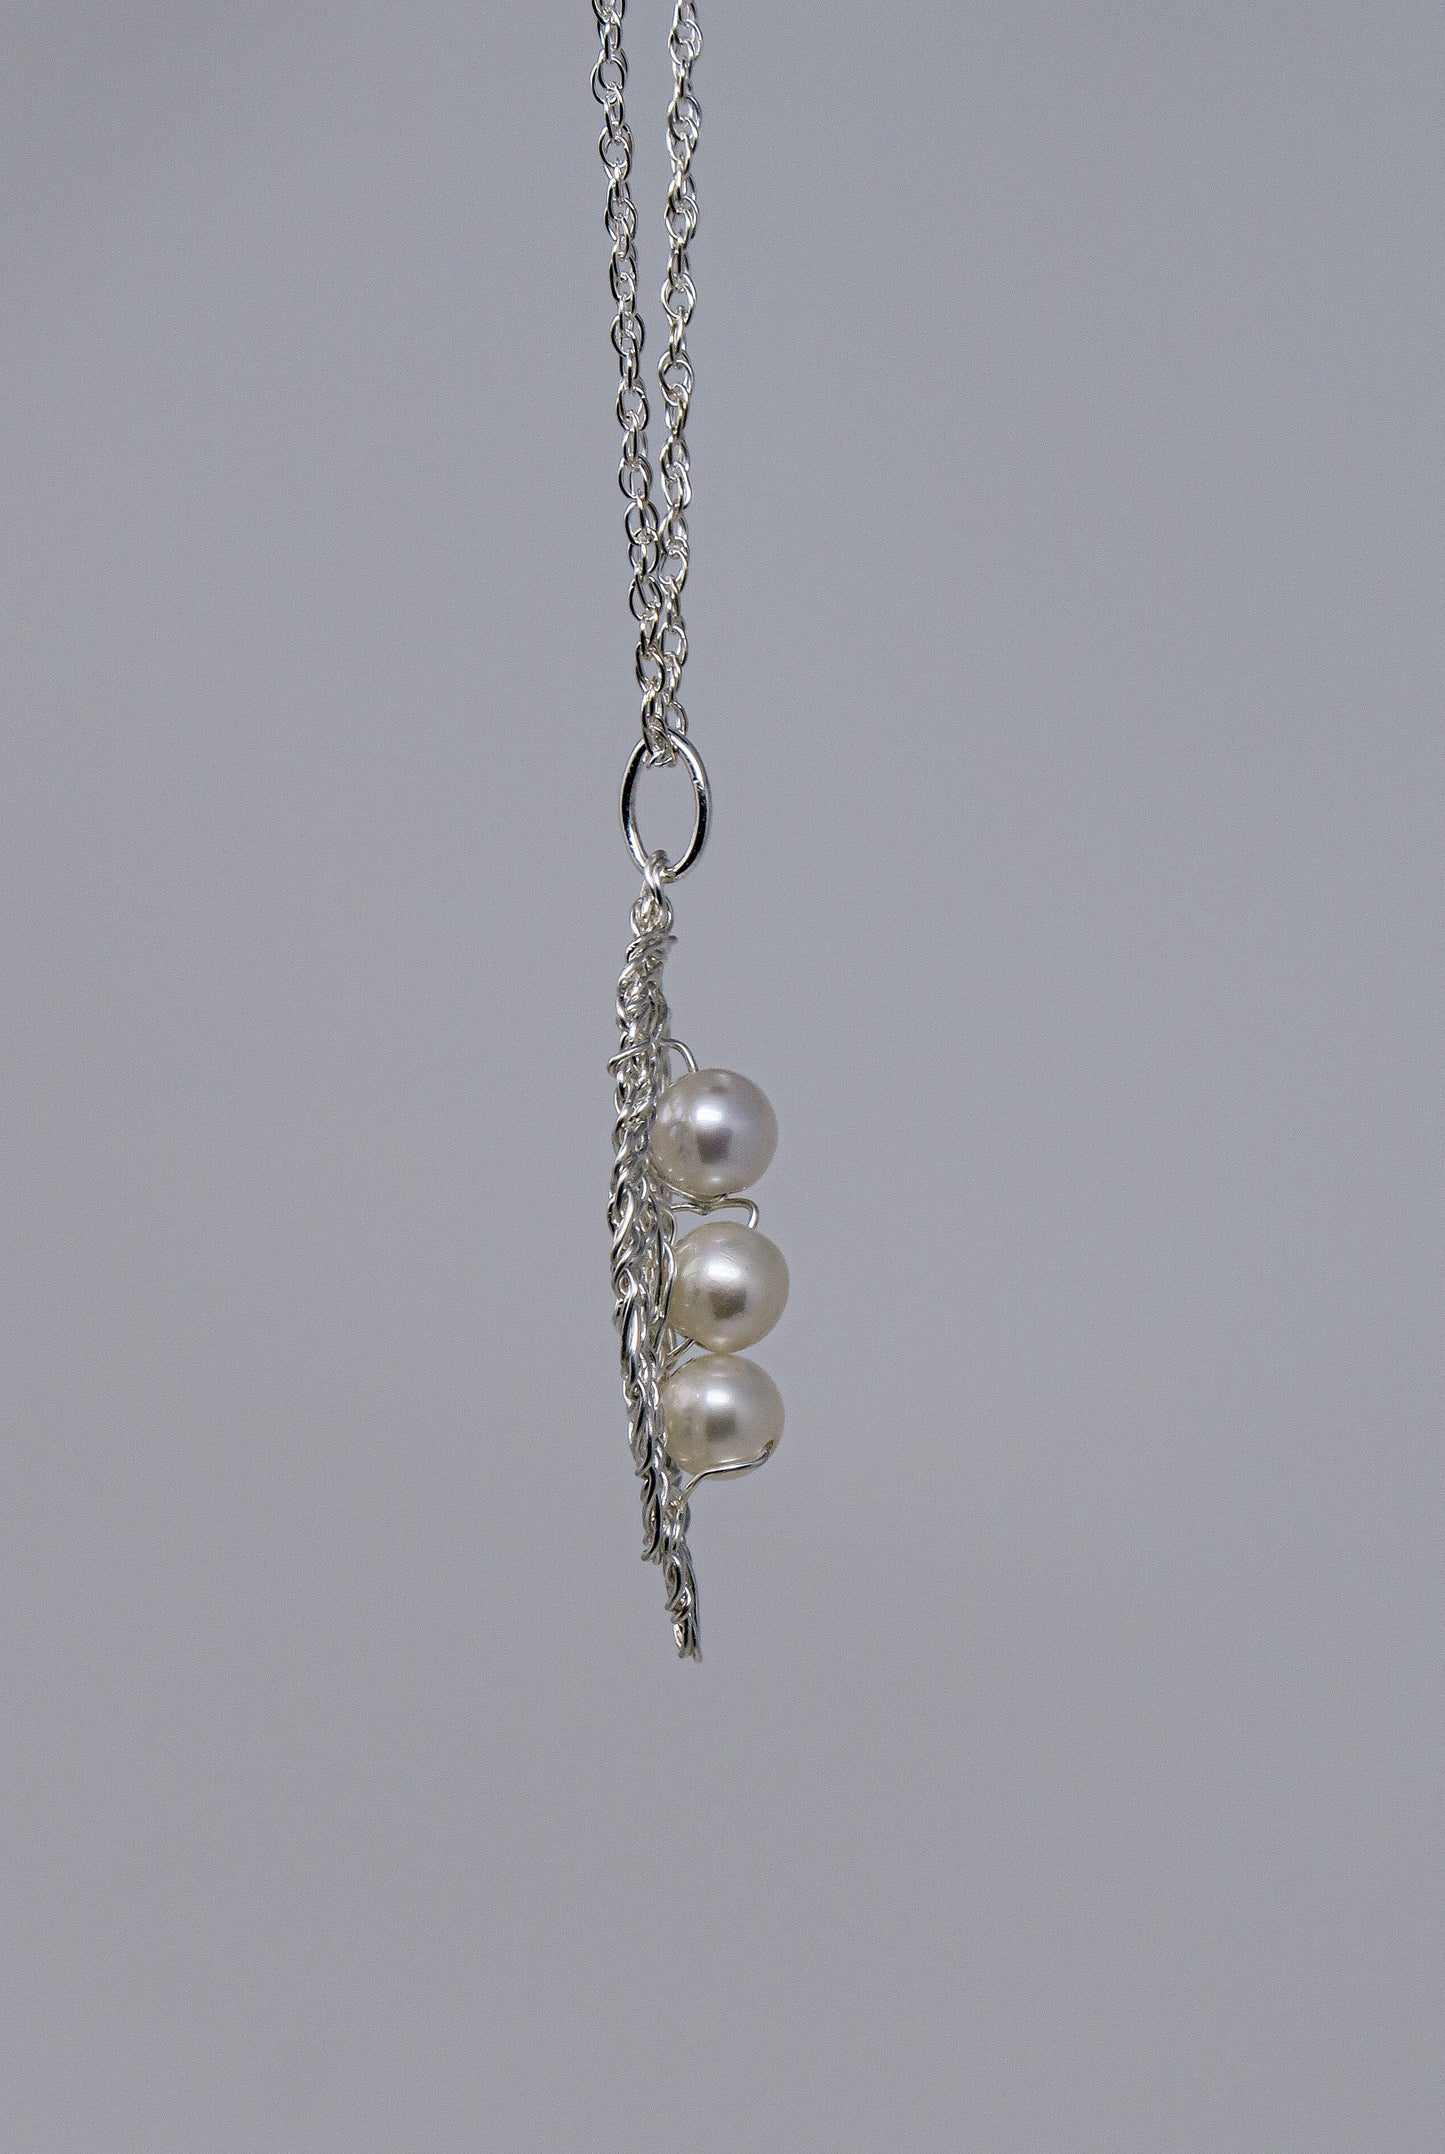 Fine ‘Small leaf with Three Peas in a Pod' Silver Pendant with Pearls on a 925 Silver Chain | by Kathryn Stanko